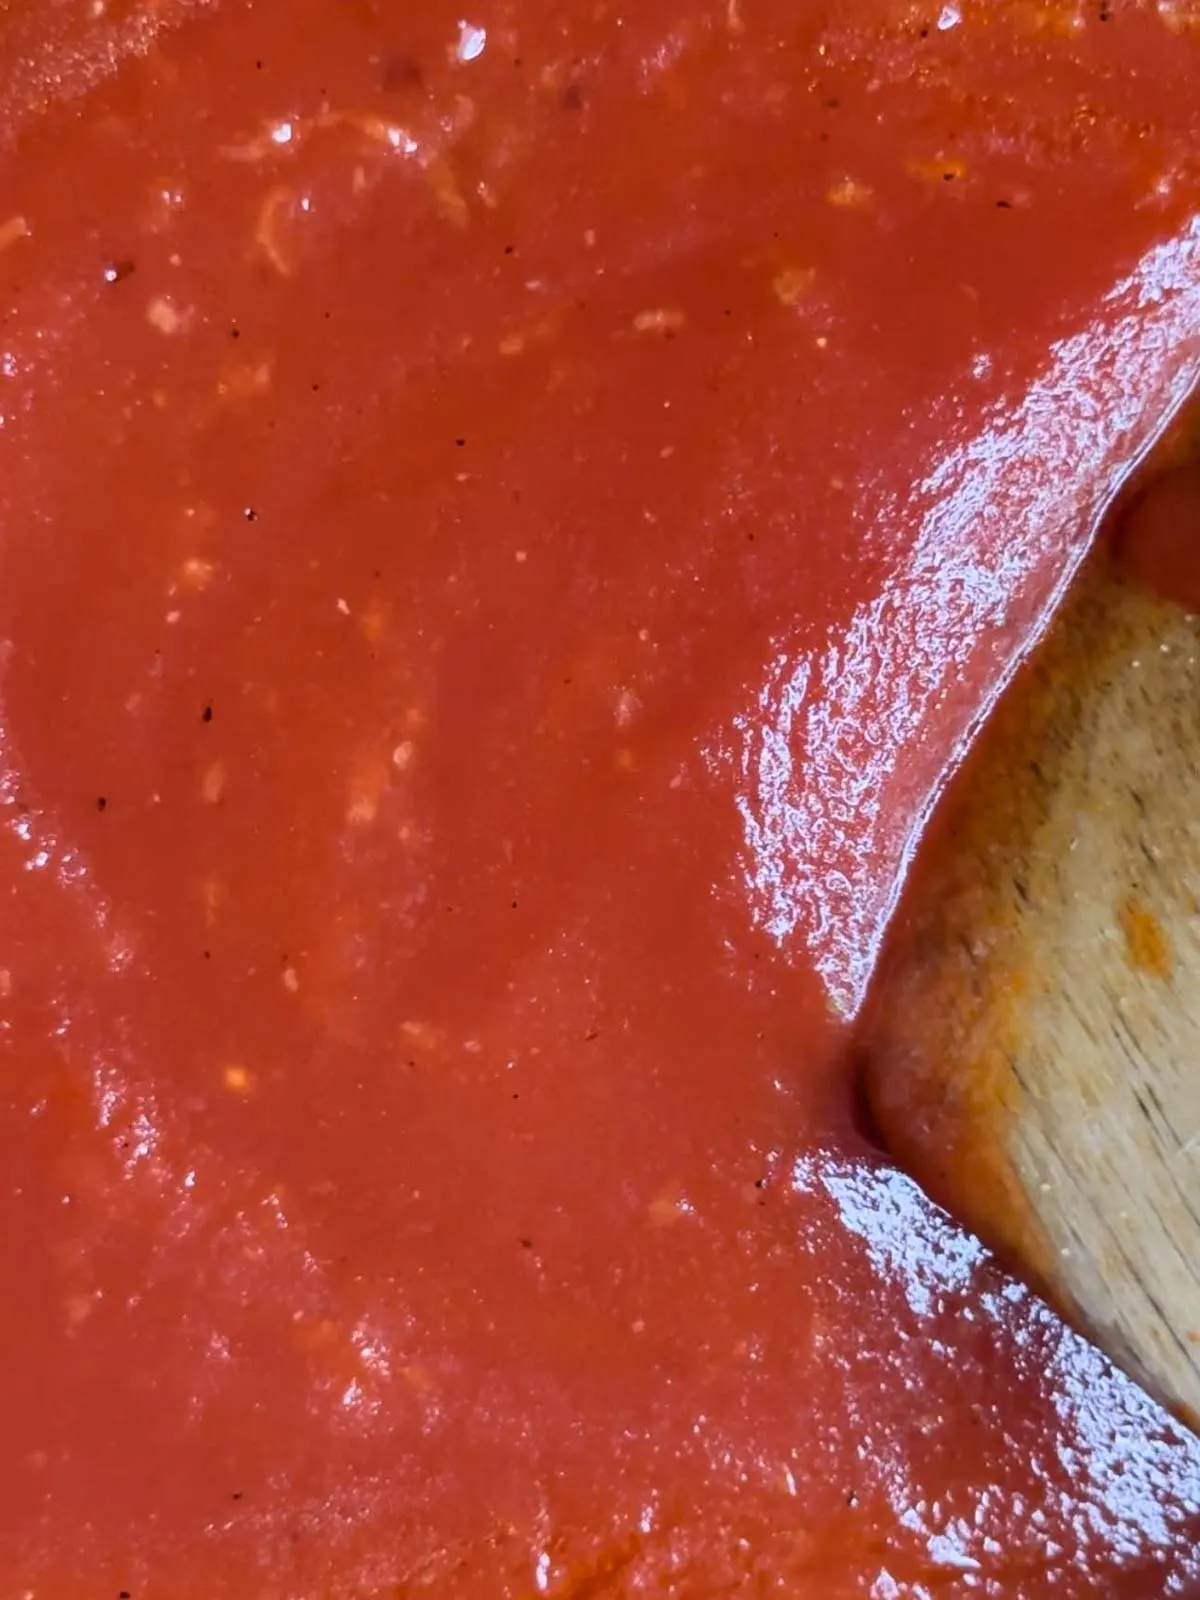 Stir the crushed tomatoes into the garlic olive oil mixture and bring this to a simmer.